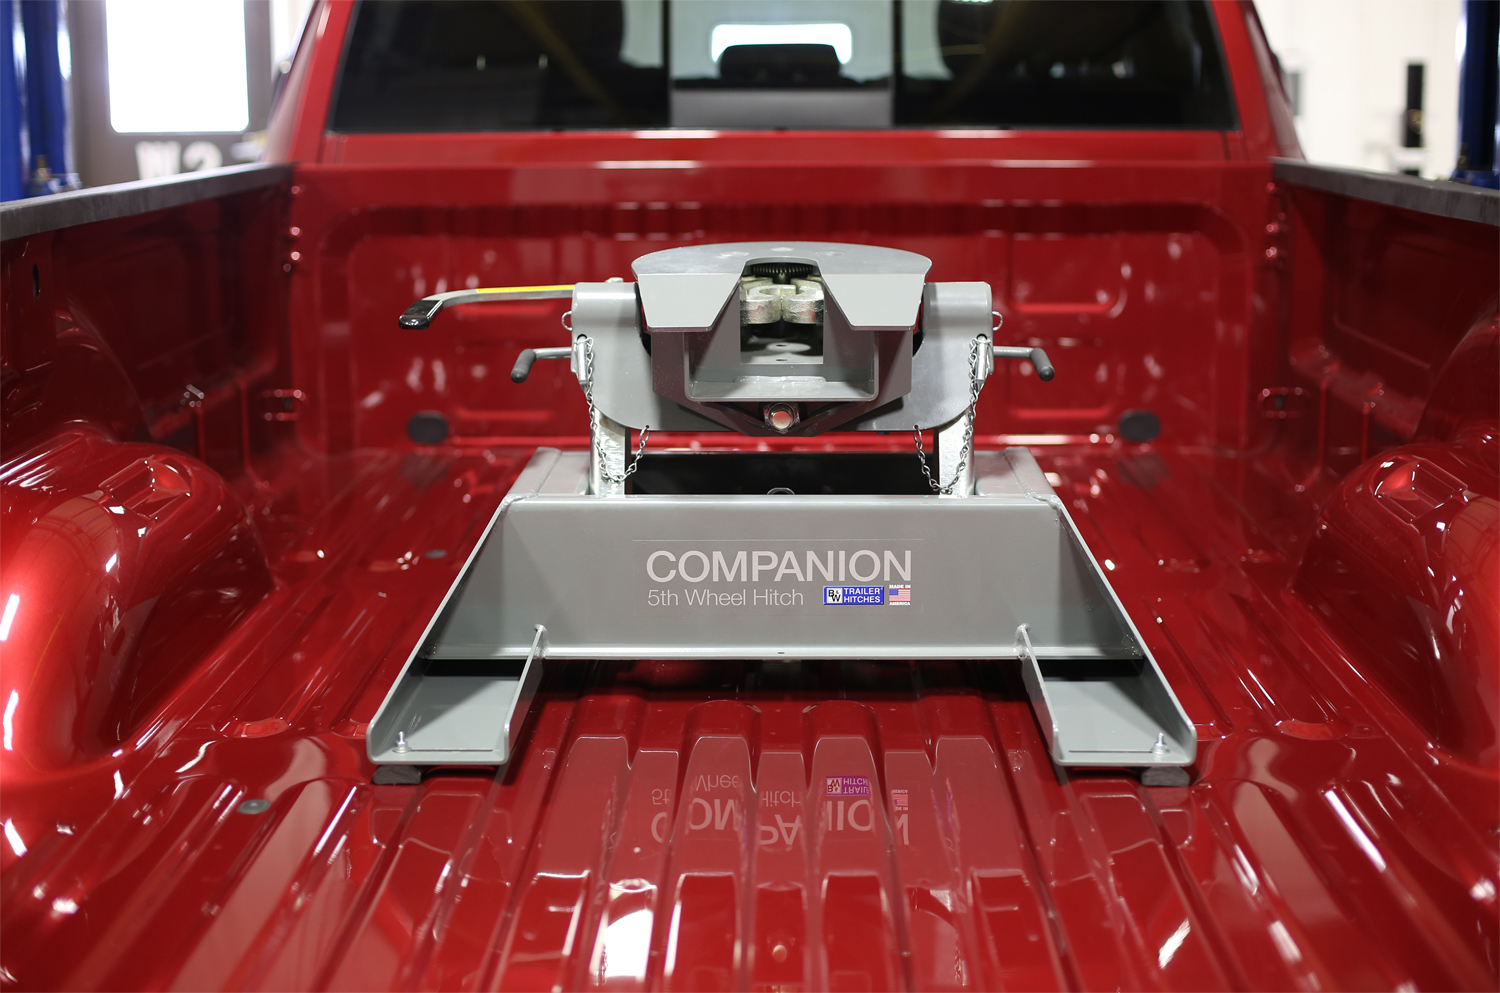 B&W's new 20,000-pound rated Companion hitch is a response to recent trends in the structure and shape of truck beds, along with the increasing lengths and weights of trailers.